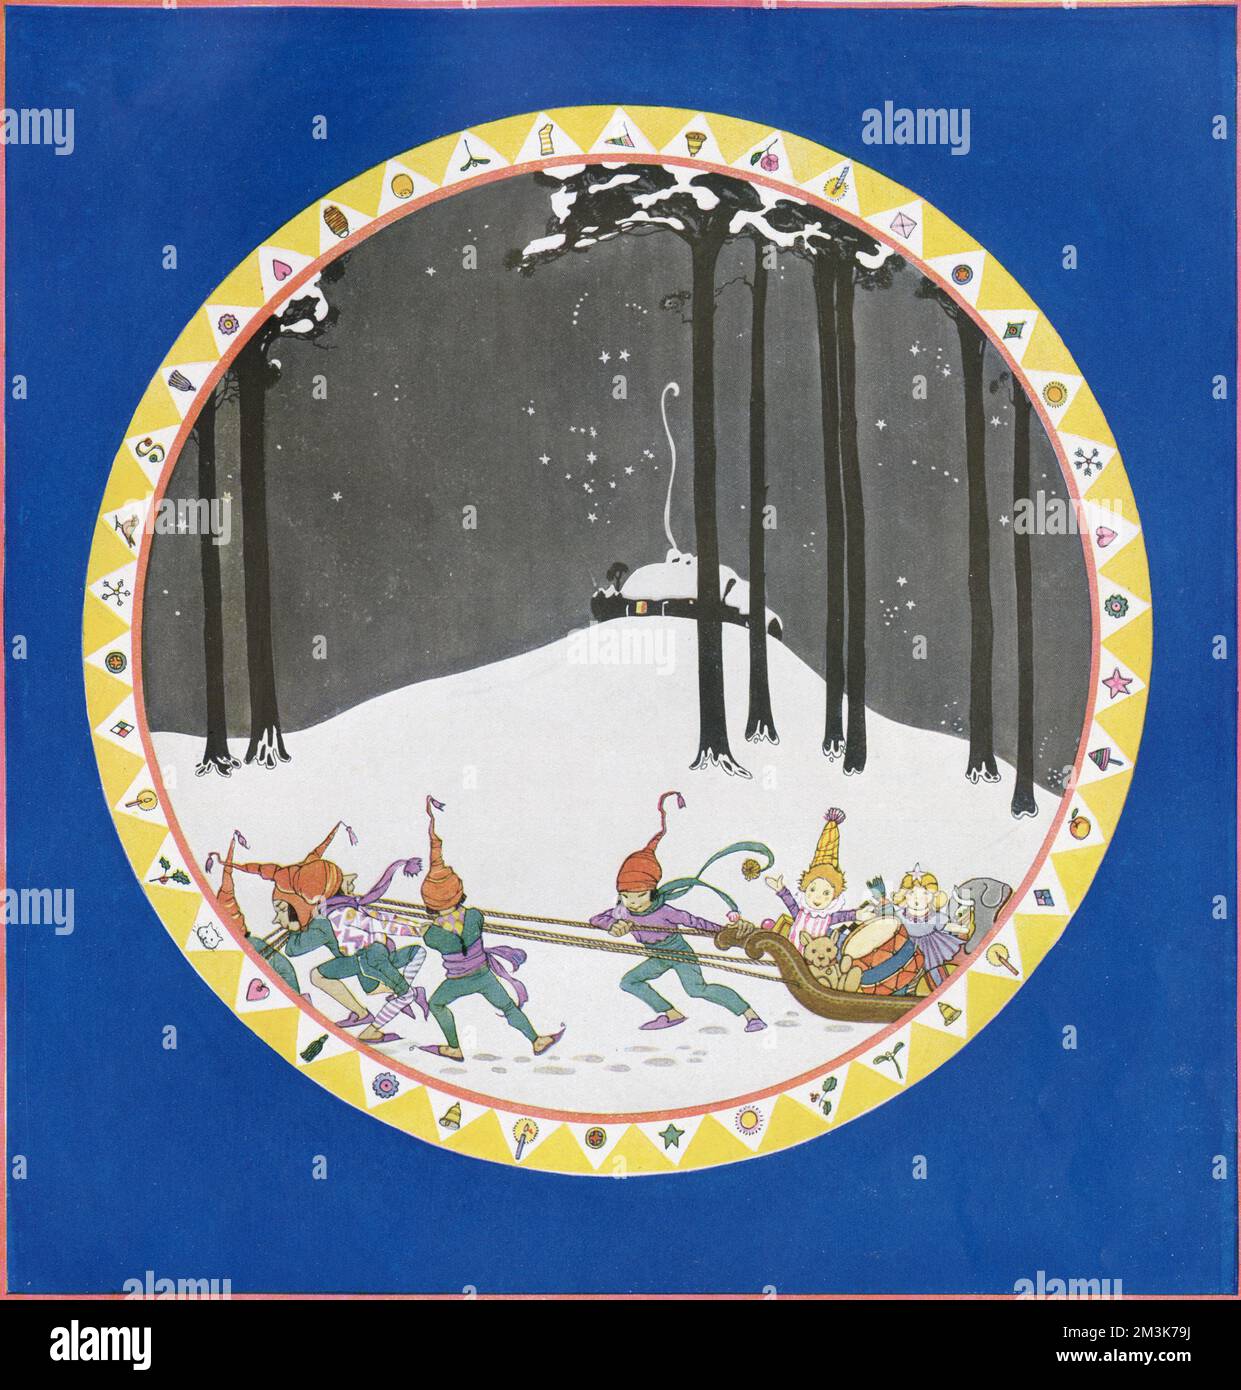 A plate design showing elves pulling a sleigh filled with toys through a wood. Stock Photo